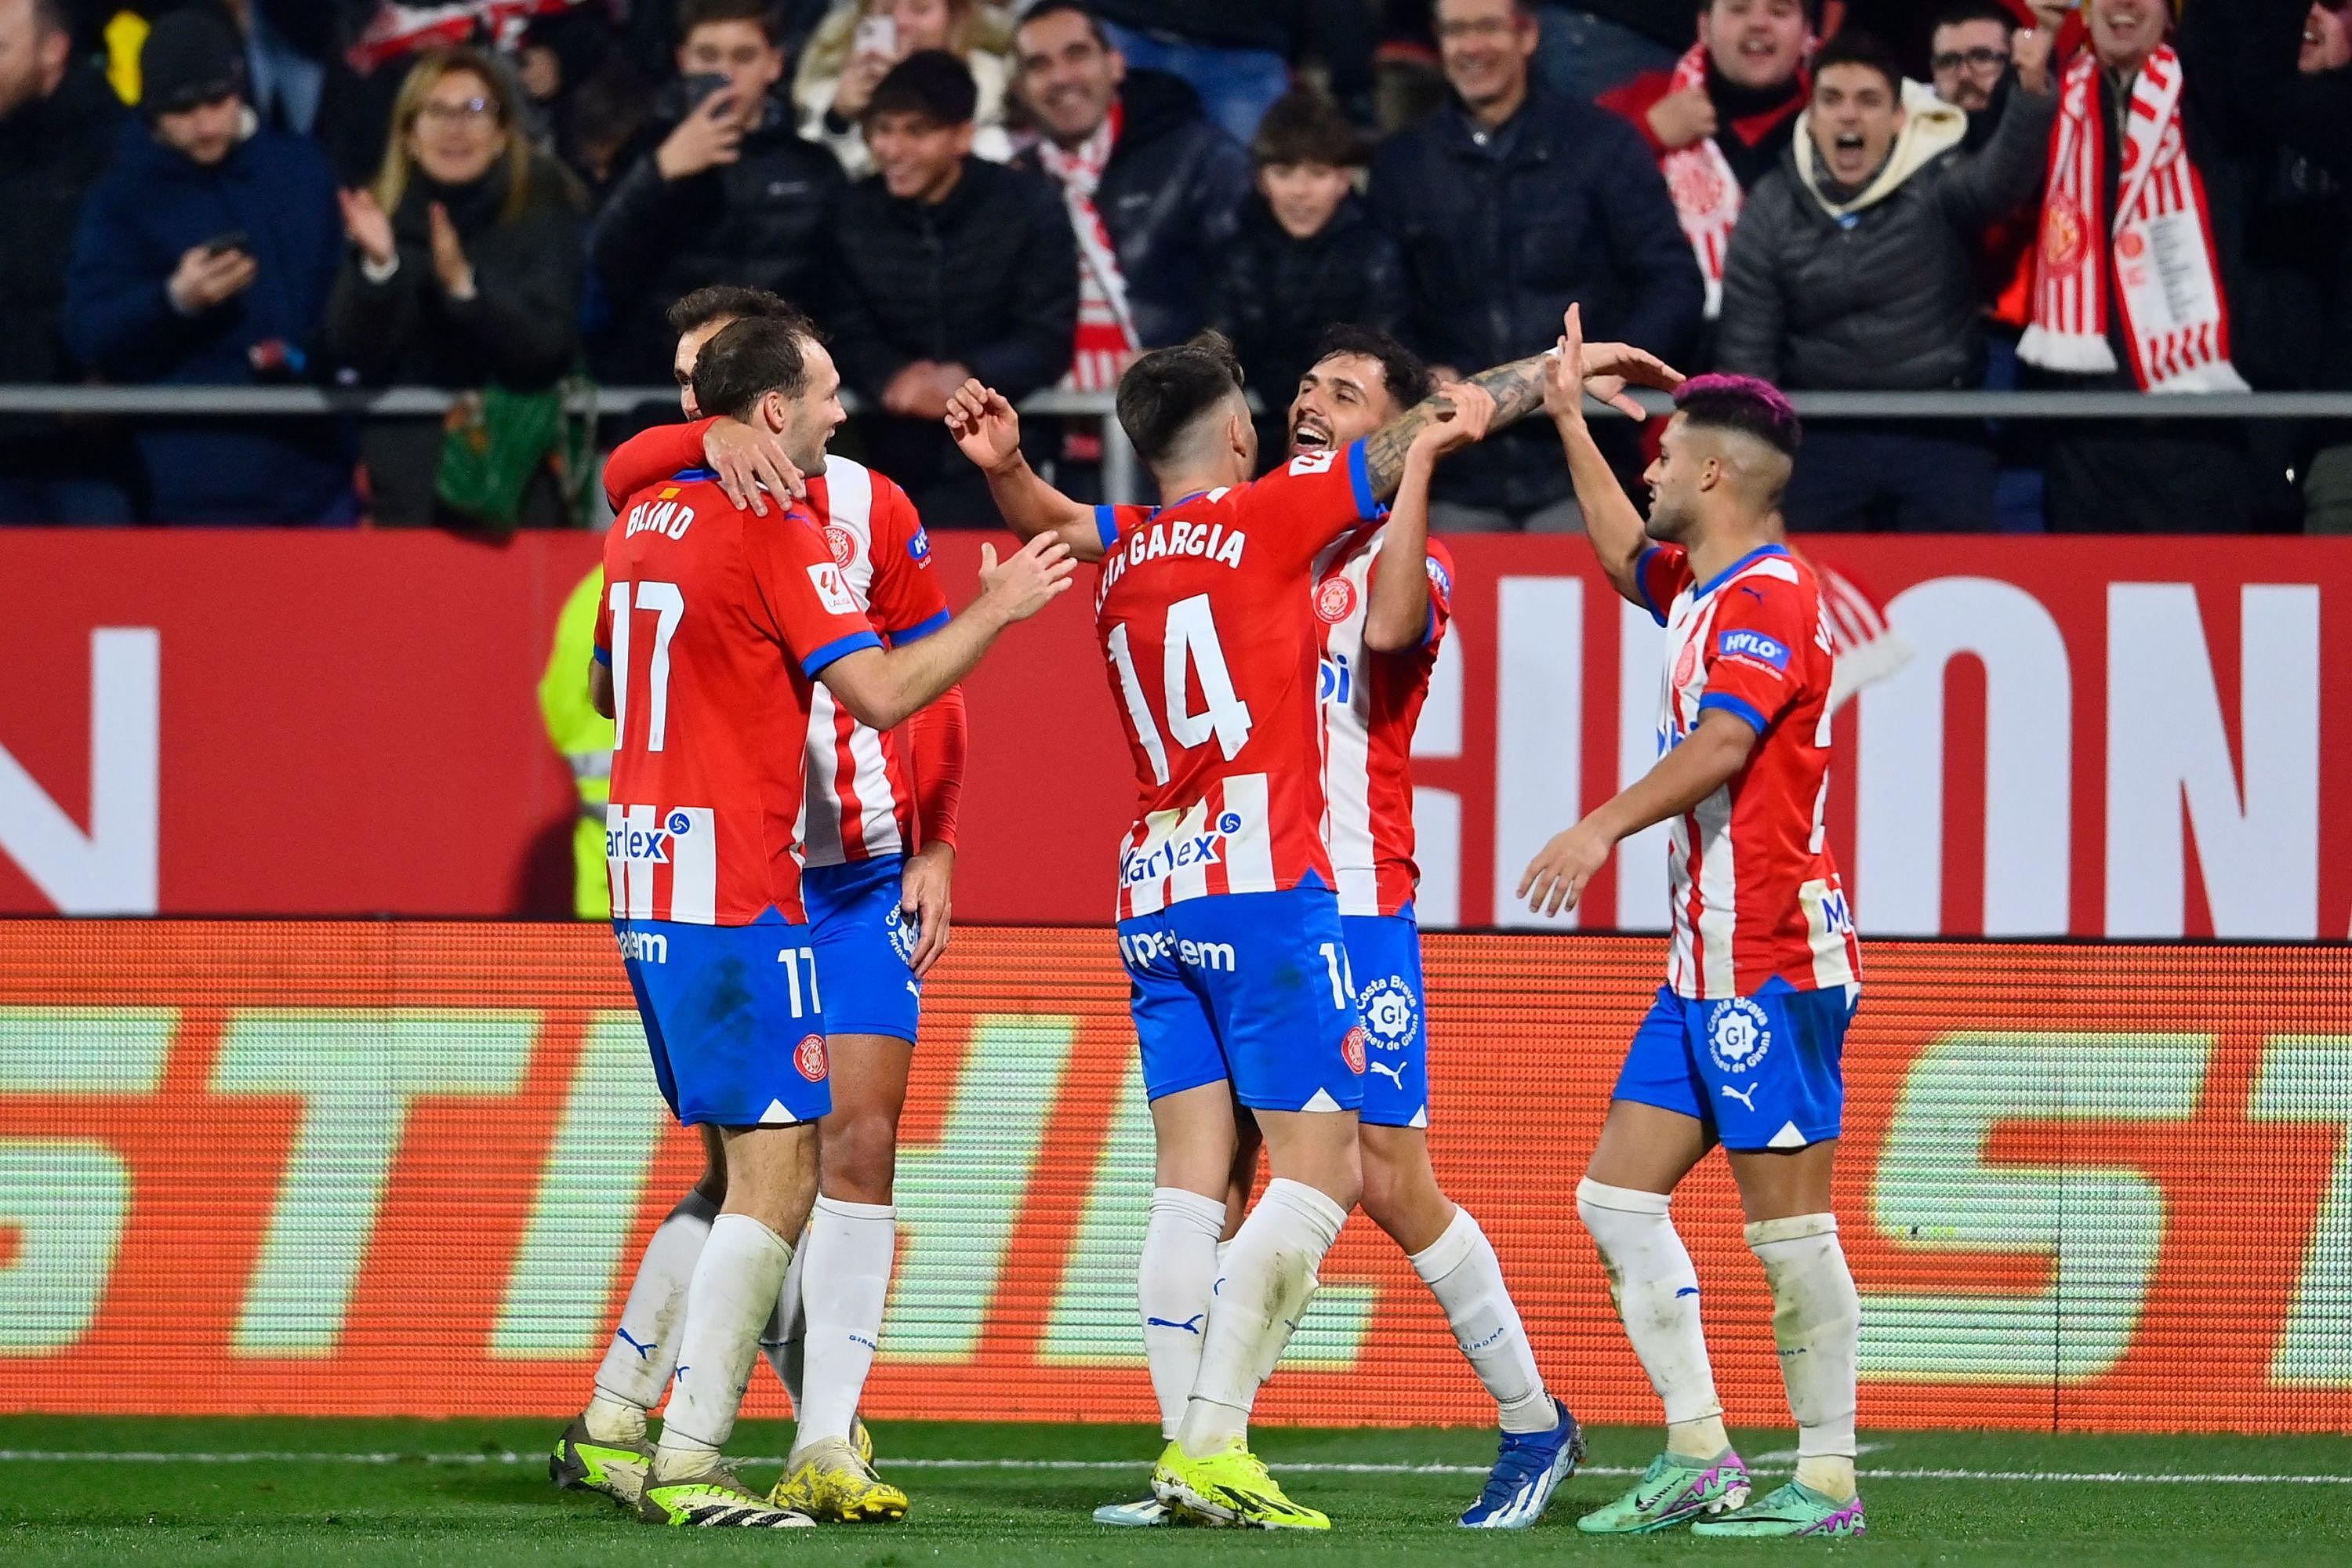 Liga: another great performance from Girona, winner of Atlético Madrid